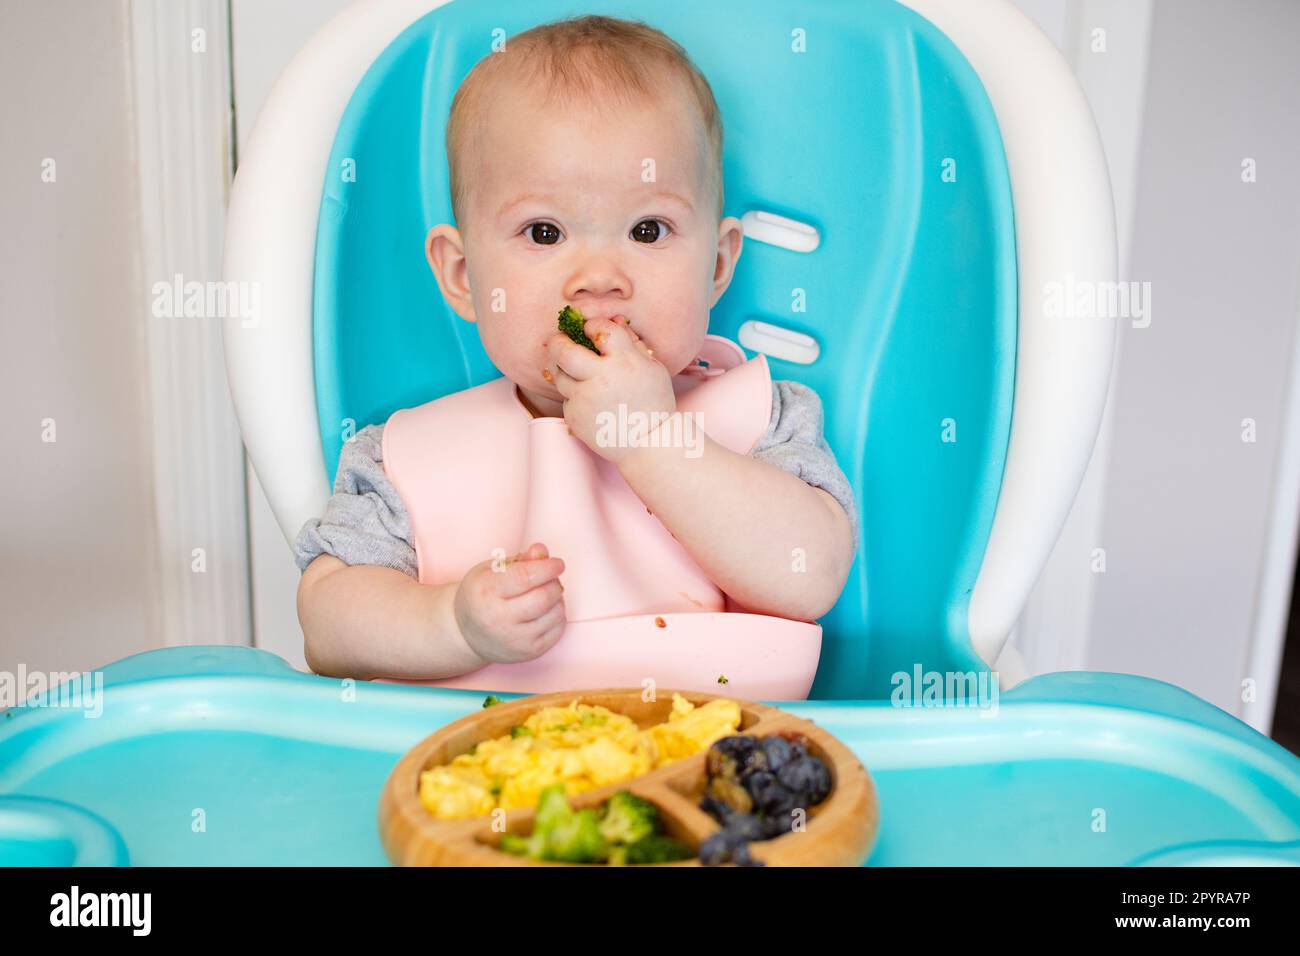 Baby eating broccoli. Baby-led weaning. Weaning. Healthy eating. Caucasian baby girl sitting in a high chair and eating her lunch Stock Photo